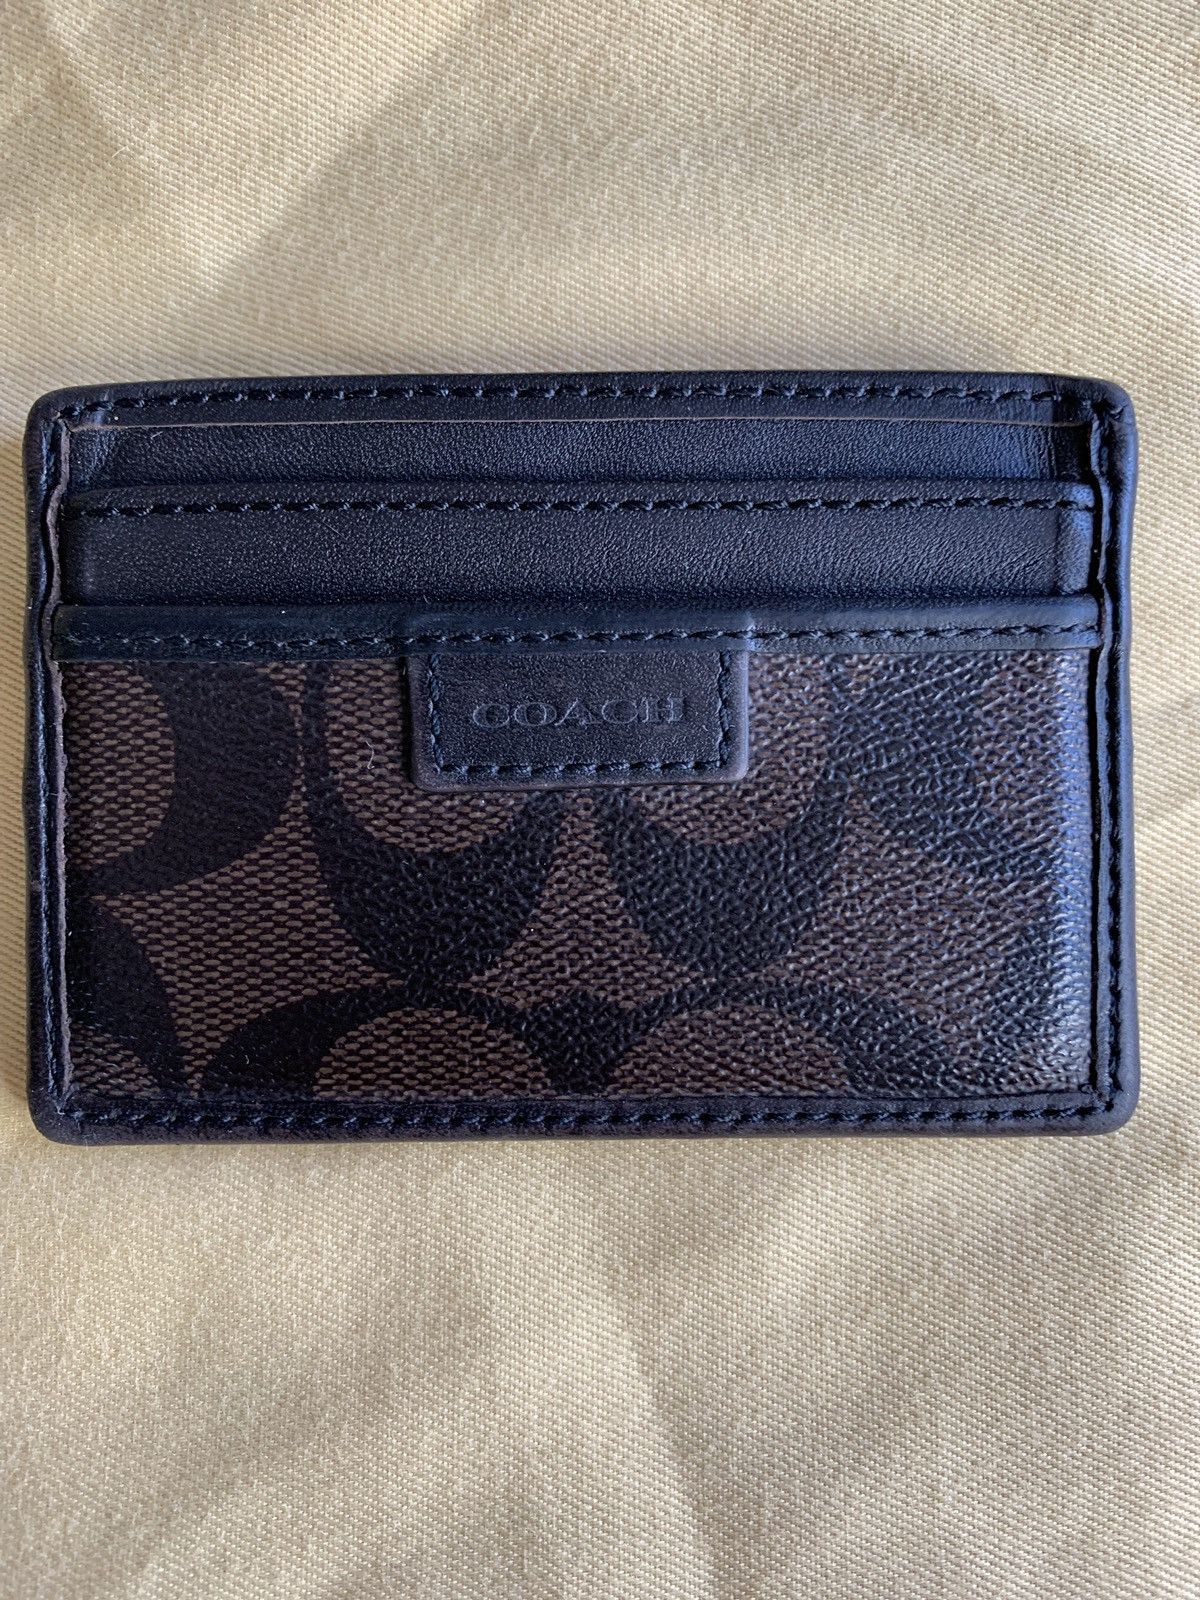 Coach Coach Genuine Leather wallet card holder | Grailed